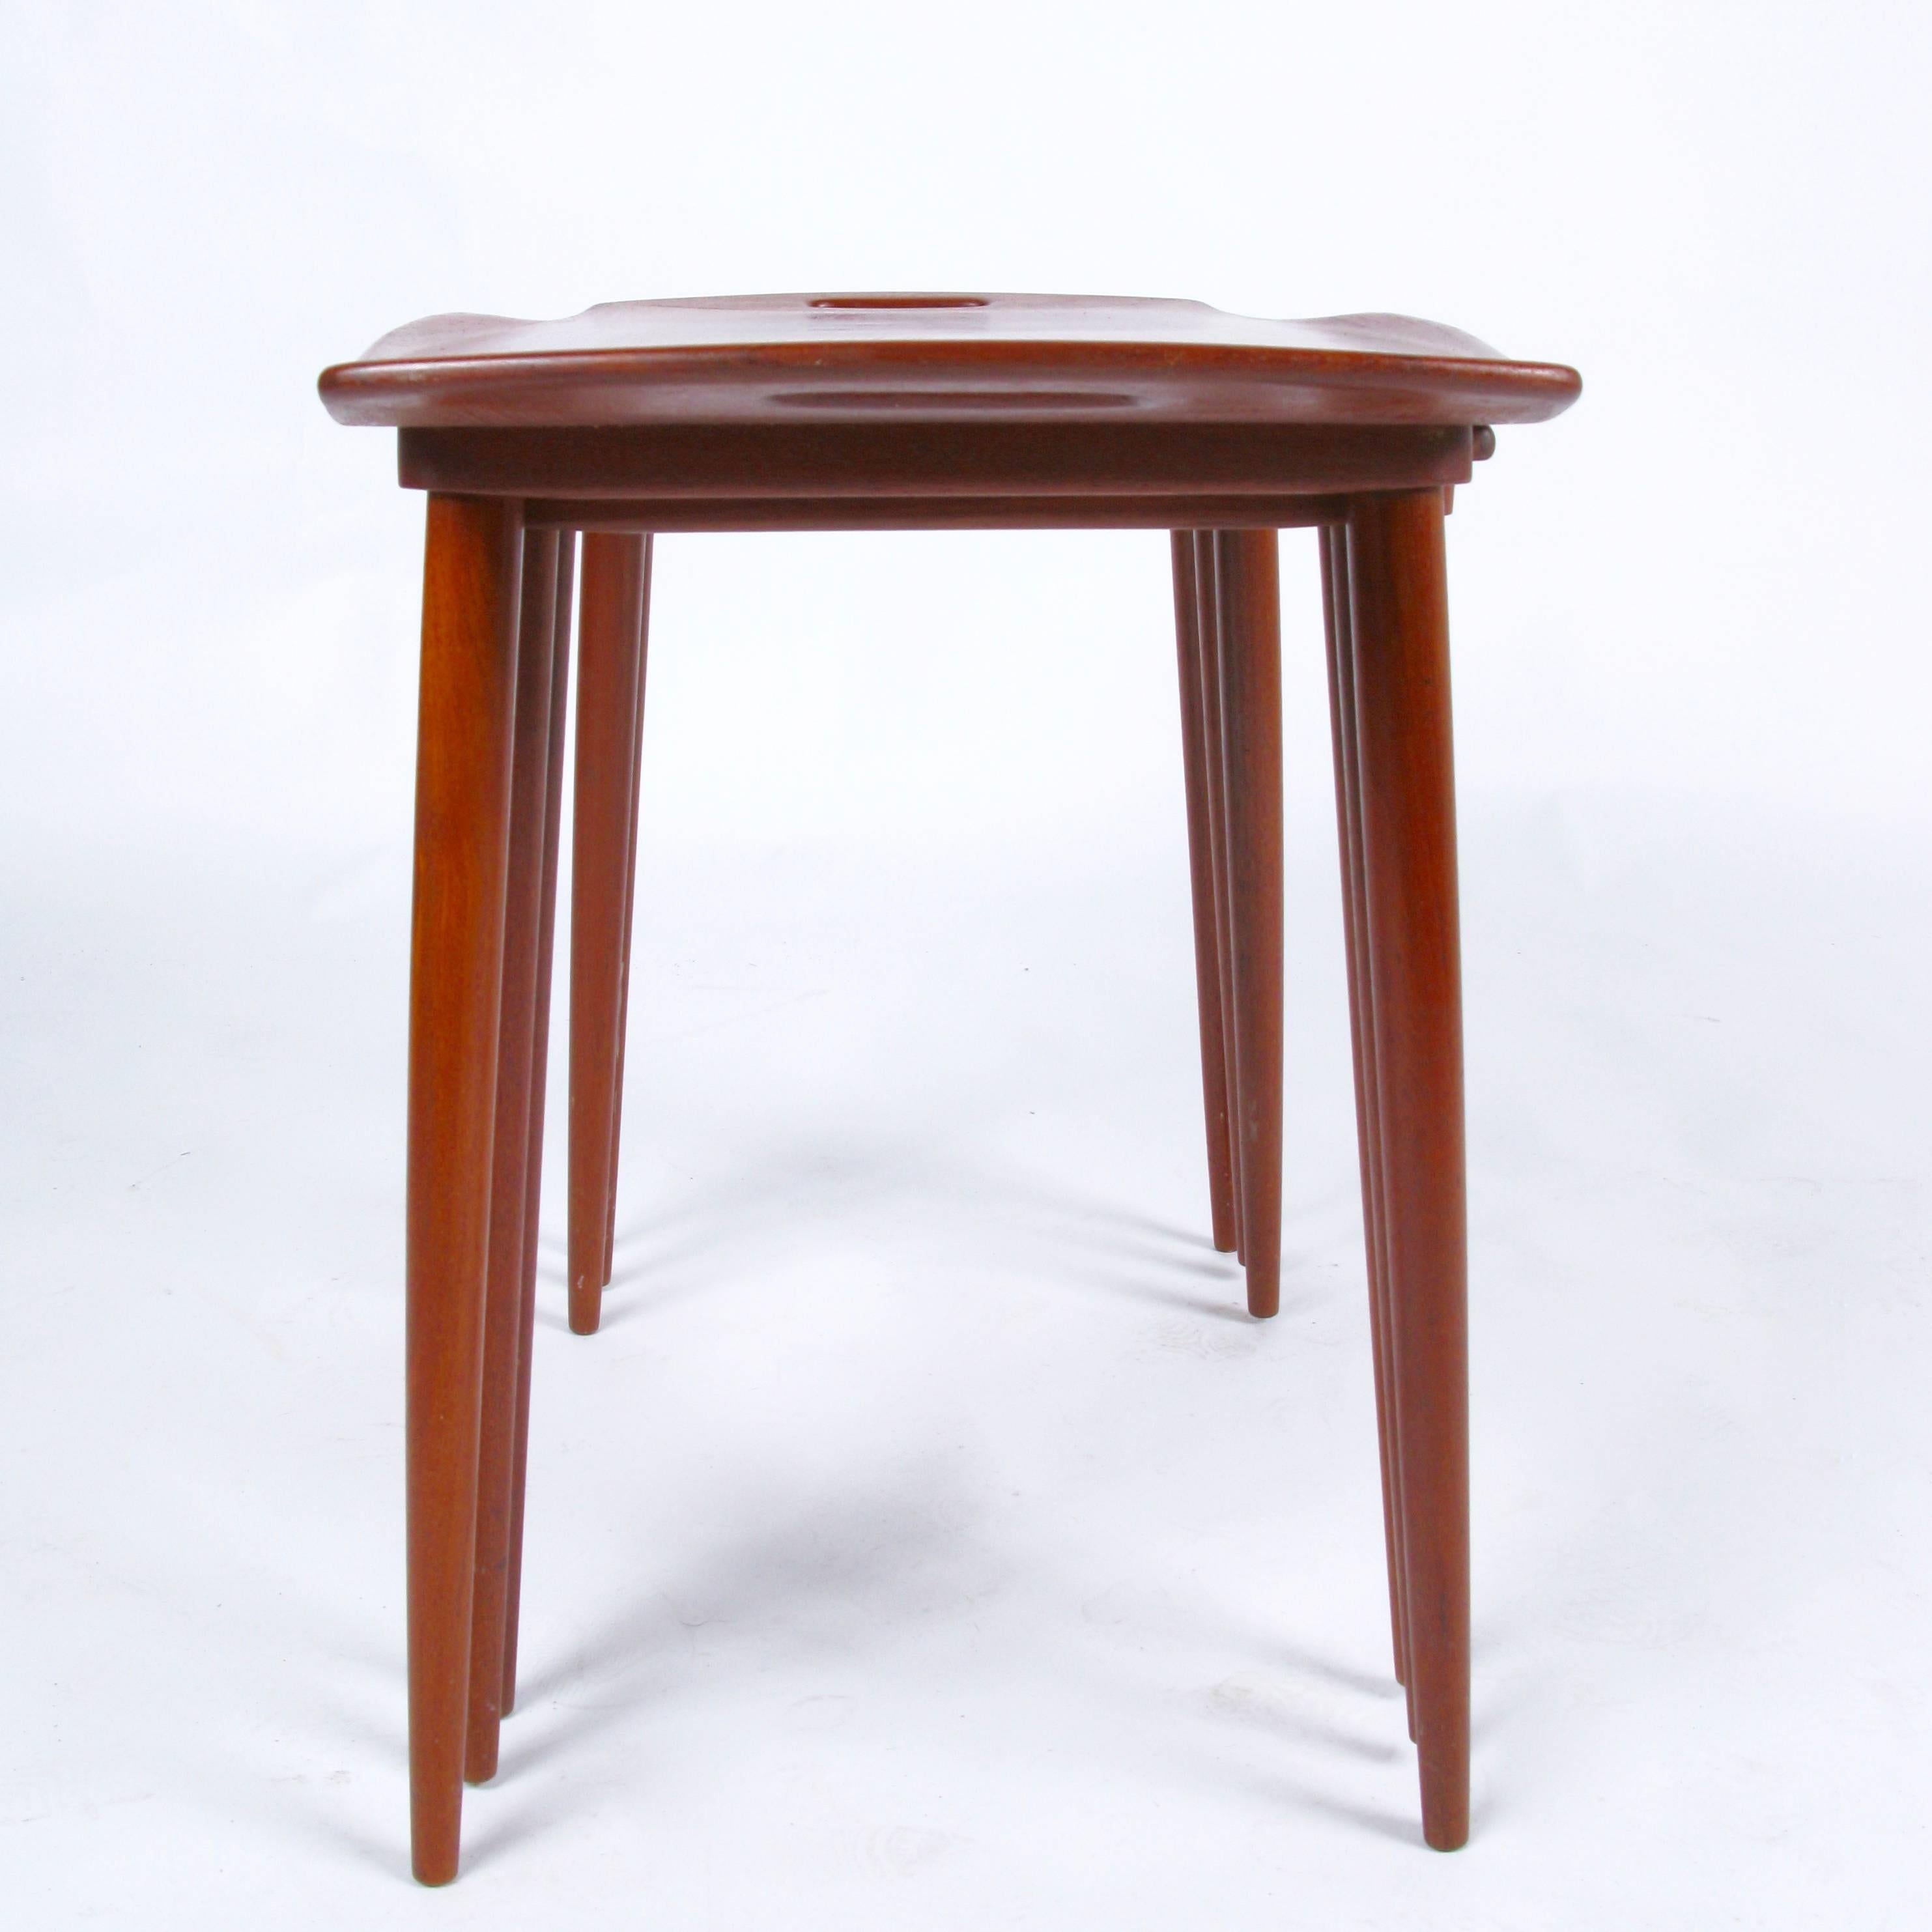 Mid-20th Century Rare Set of Teak Nest Tables by Jens Quistgaard